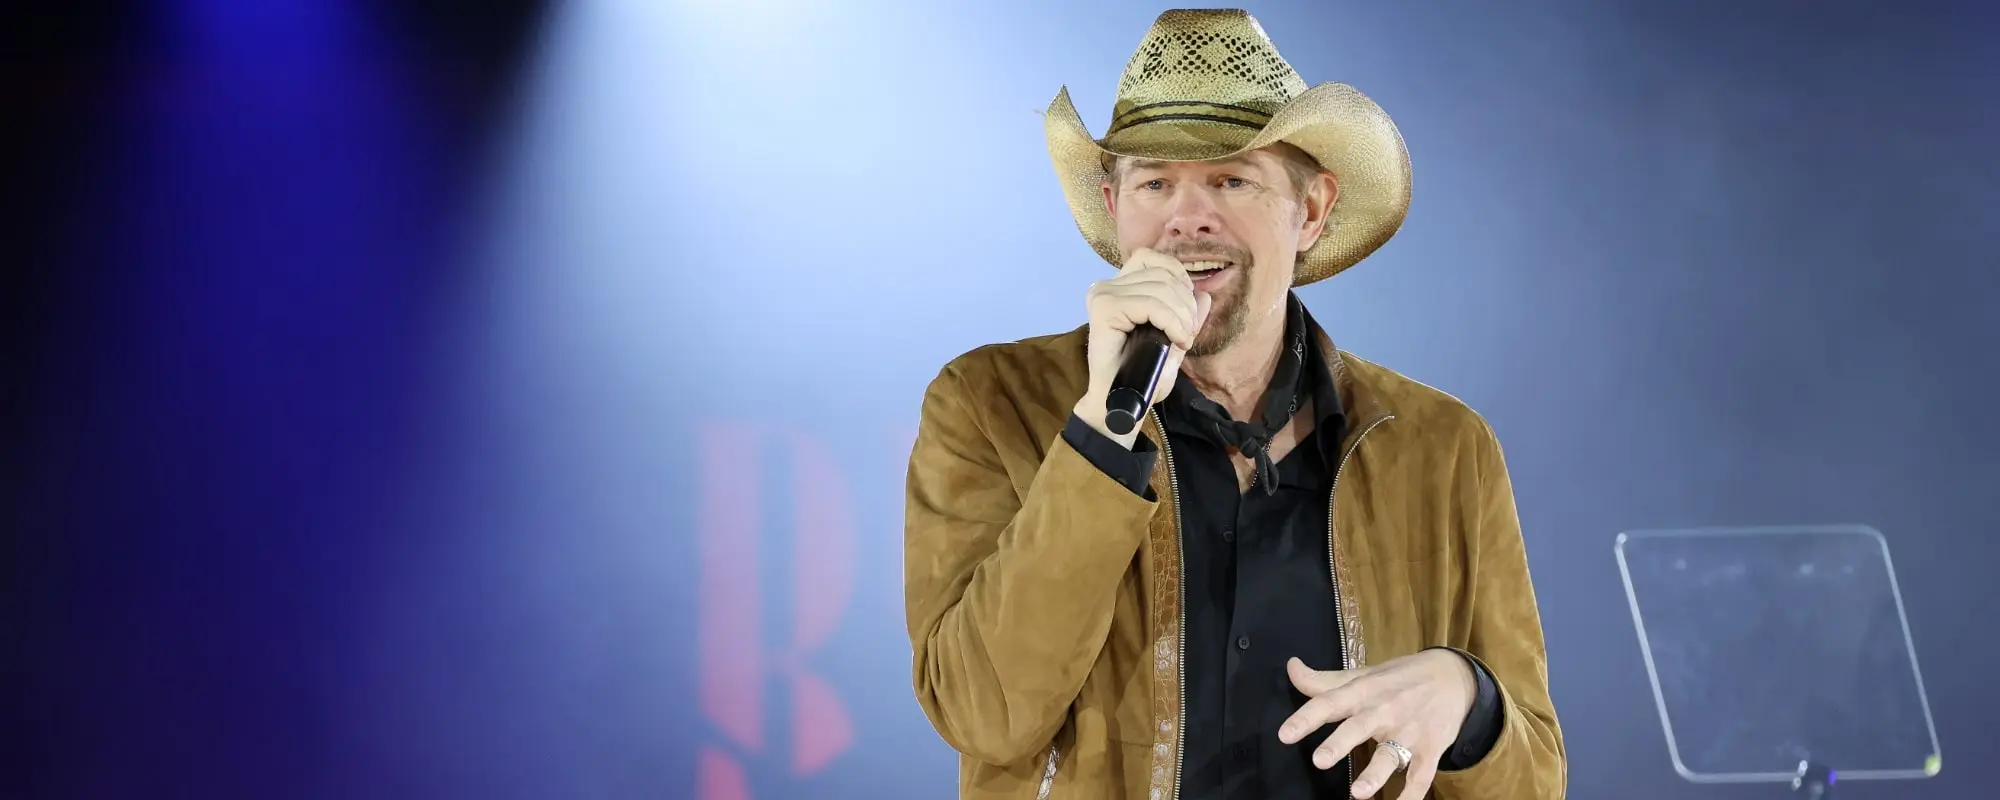 Jelly Roll Pays Tribute to Late Country Star Toby Keith: “Toby Inspired Millions and I’m One of Them”